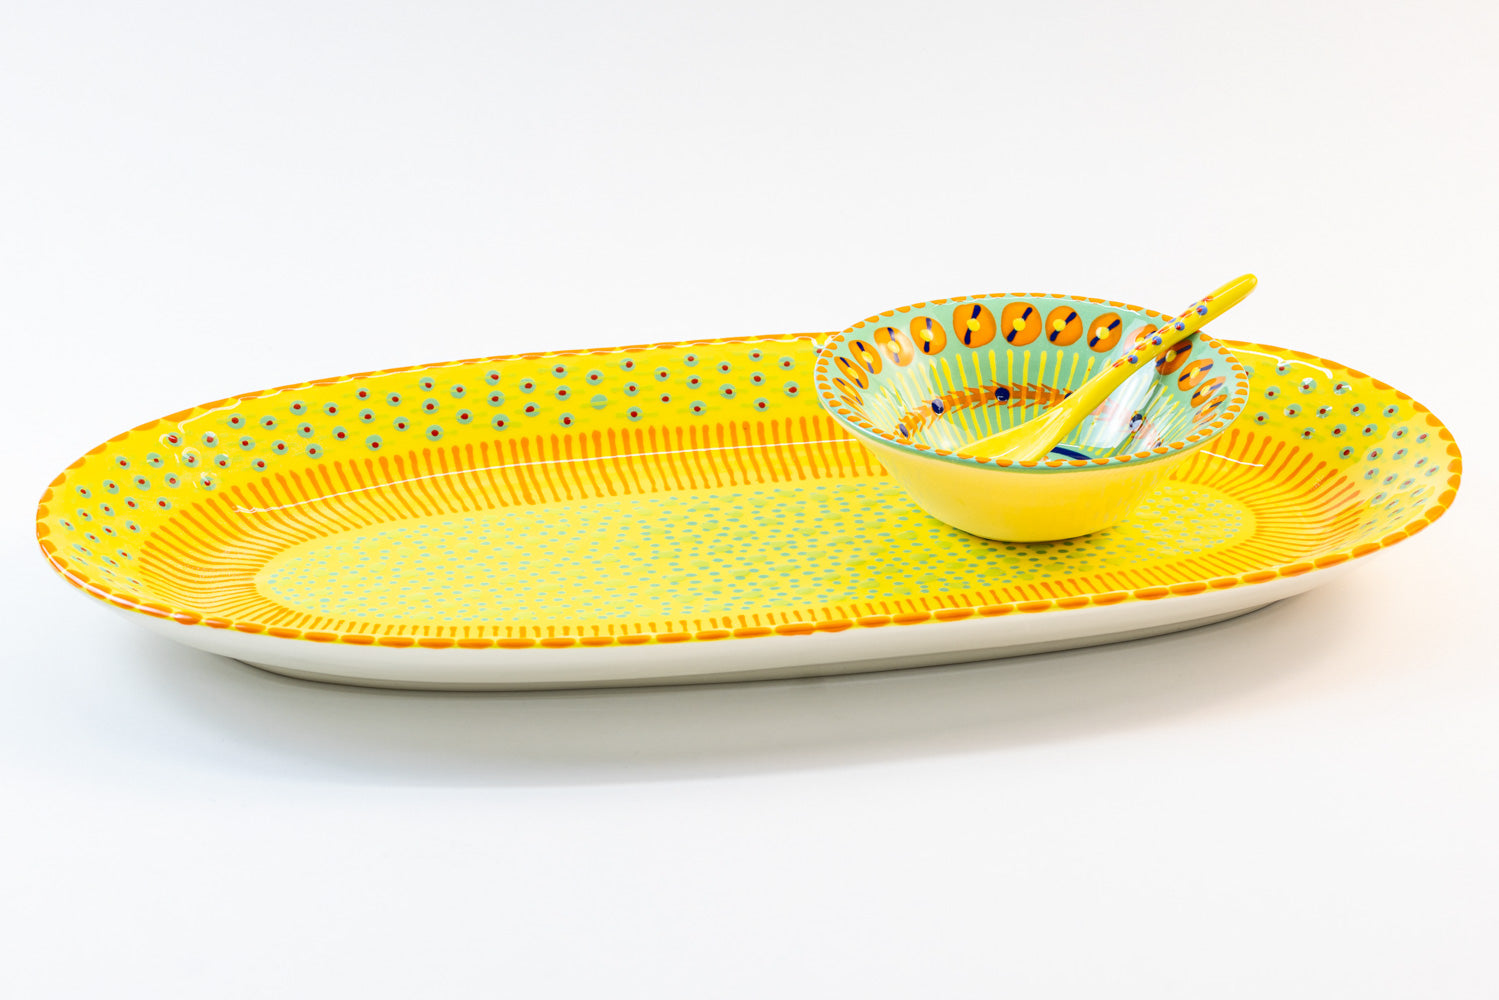 Ceramic serving platter in Yellow with Jasper Green mini nut bowl & Yellow small spoon sitting on the platter. Perfect size for condiments and wonderfully beautiful color contrasts.